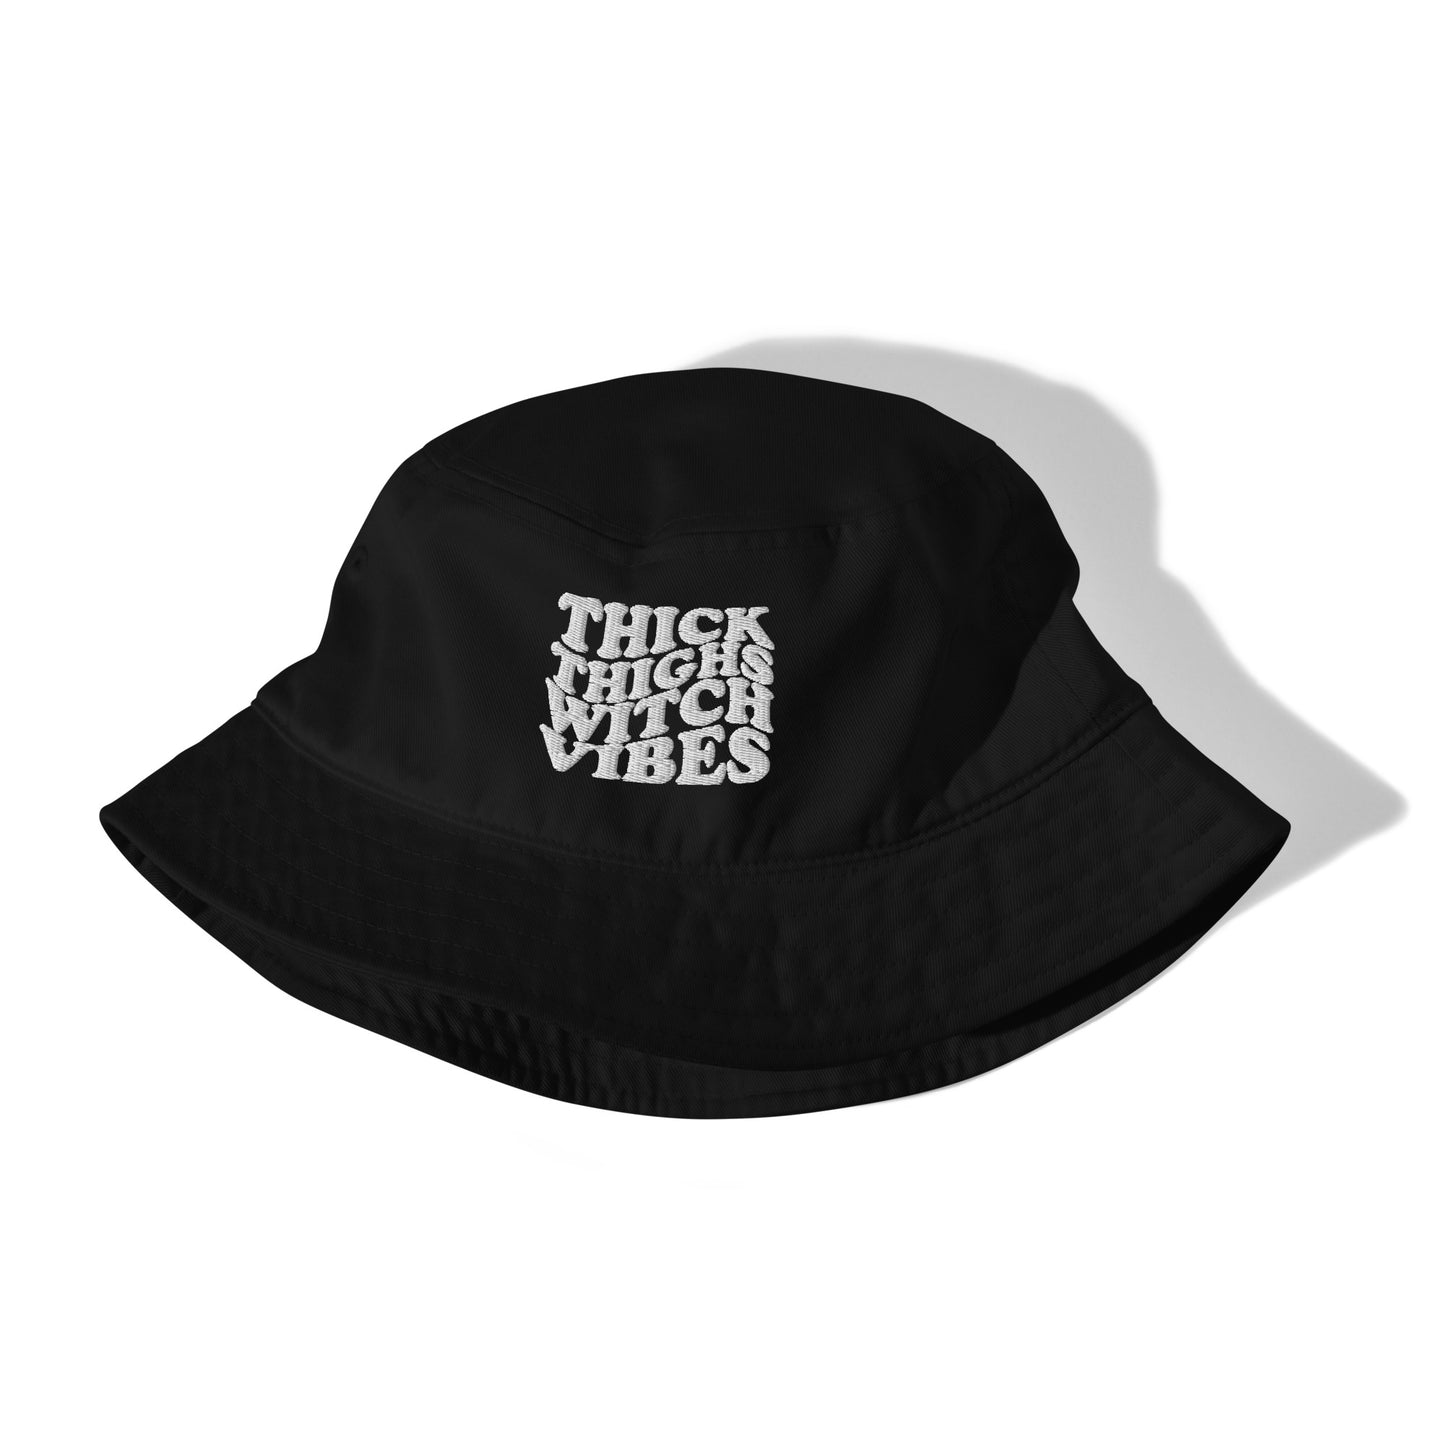 Thick Witch Organic bucket hat